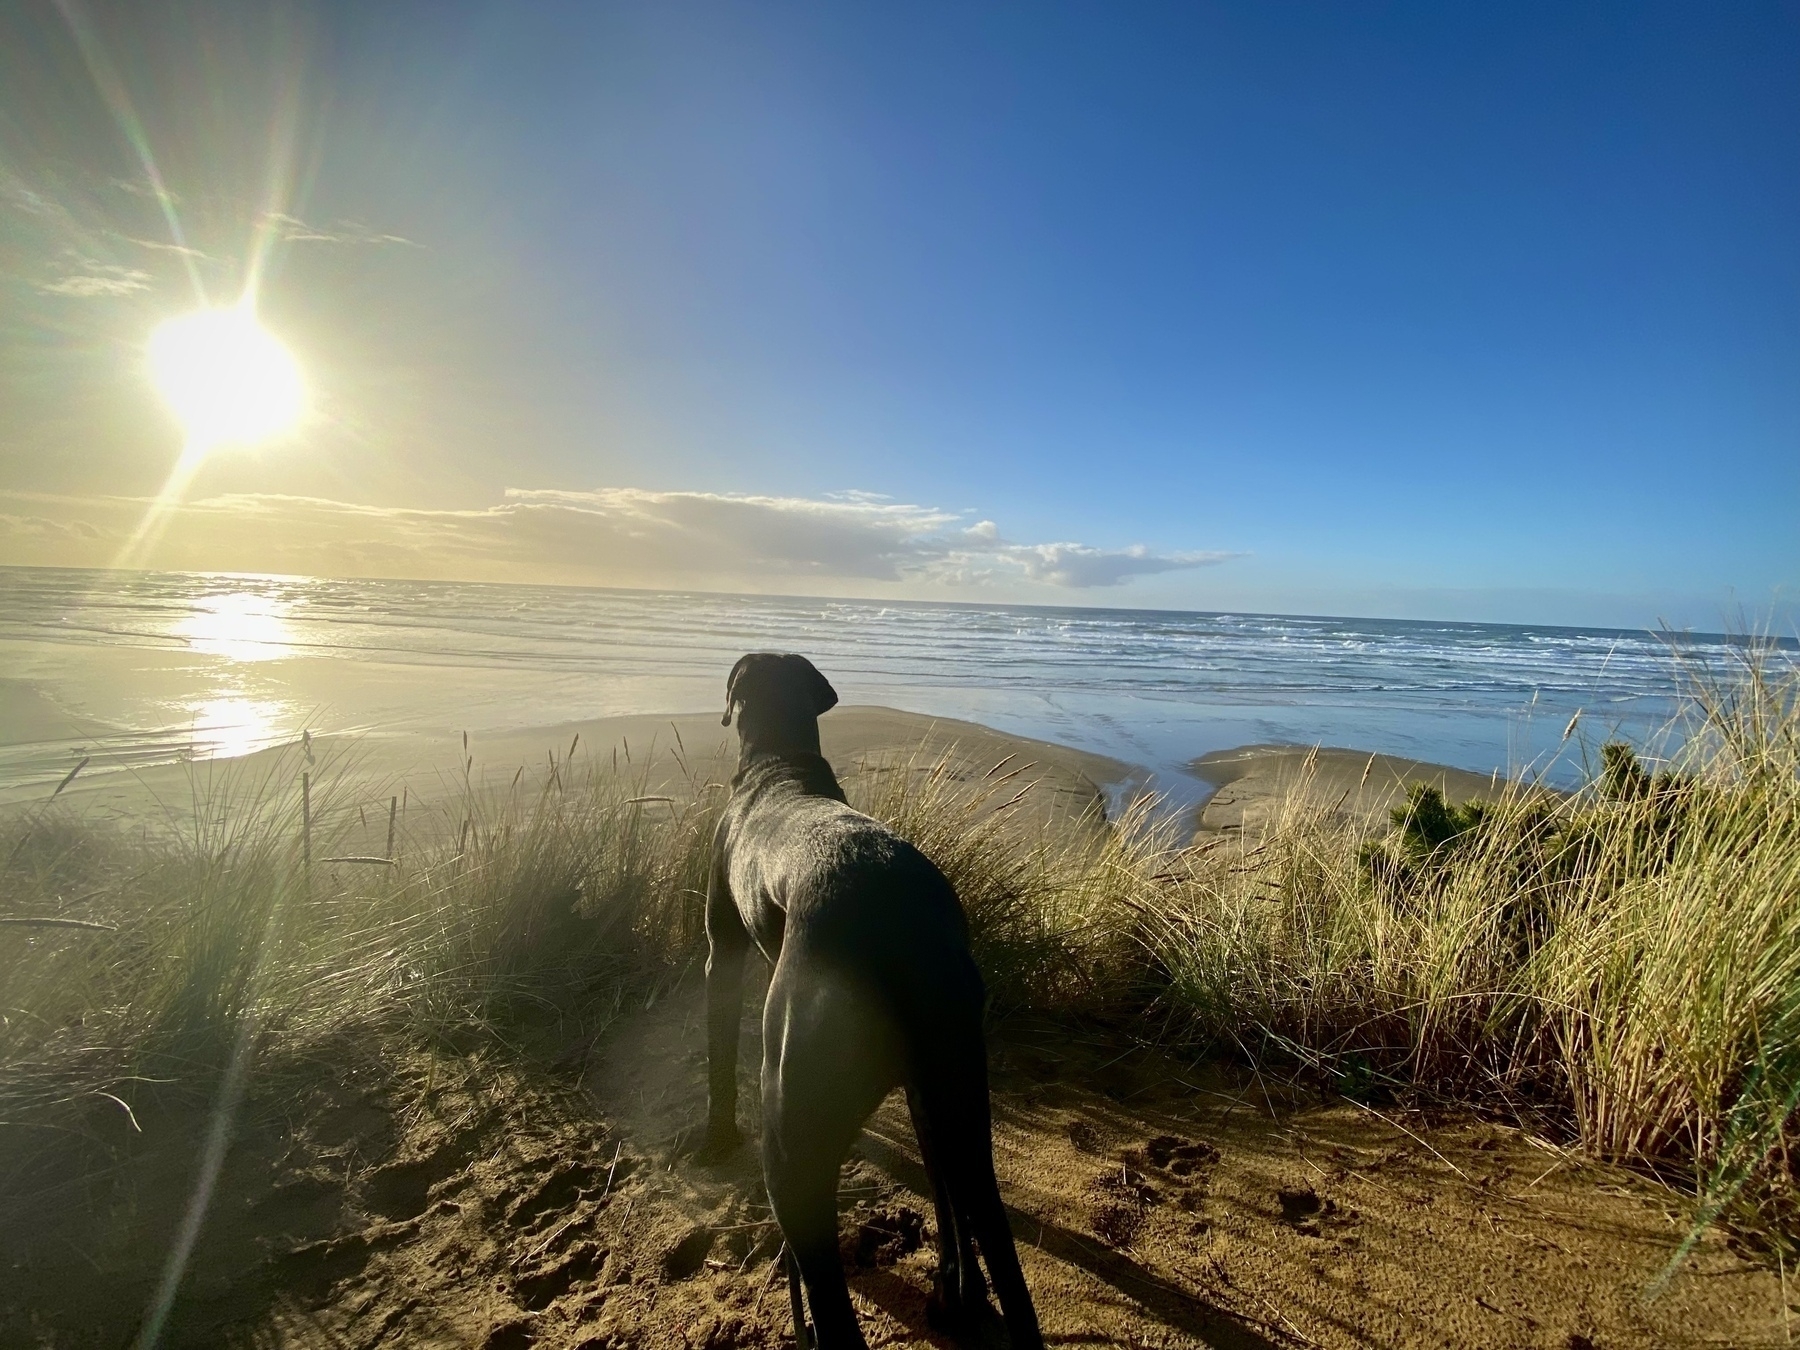 Tink, a 2.5 year old black Daniff, looks over the ocean from a cliff while the midafternoon sun beams down on him. The photo is taken on the Oregon Coast. 